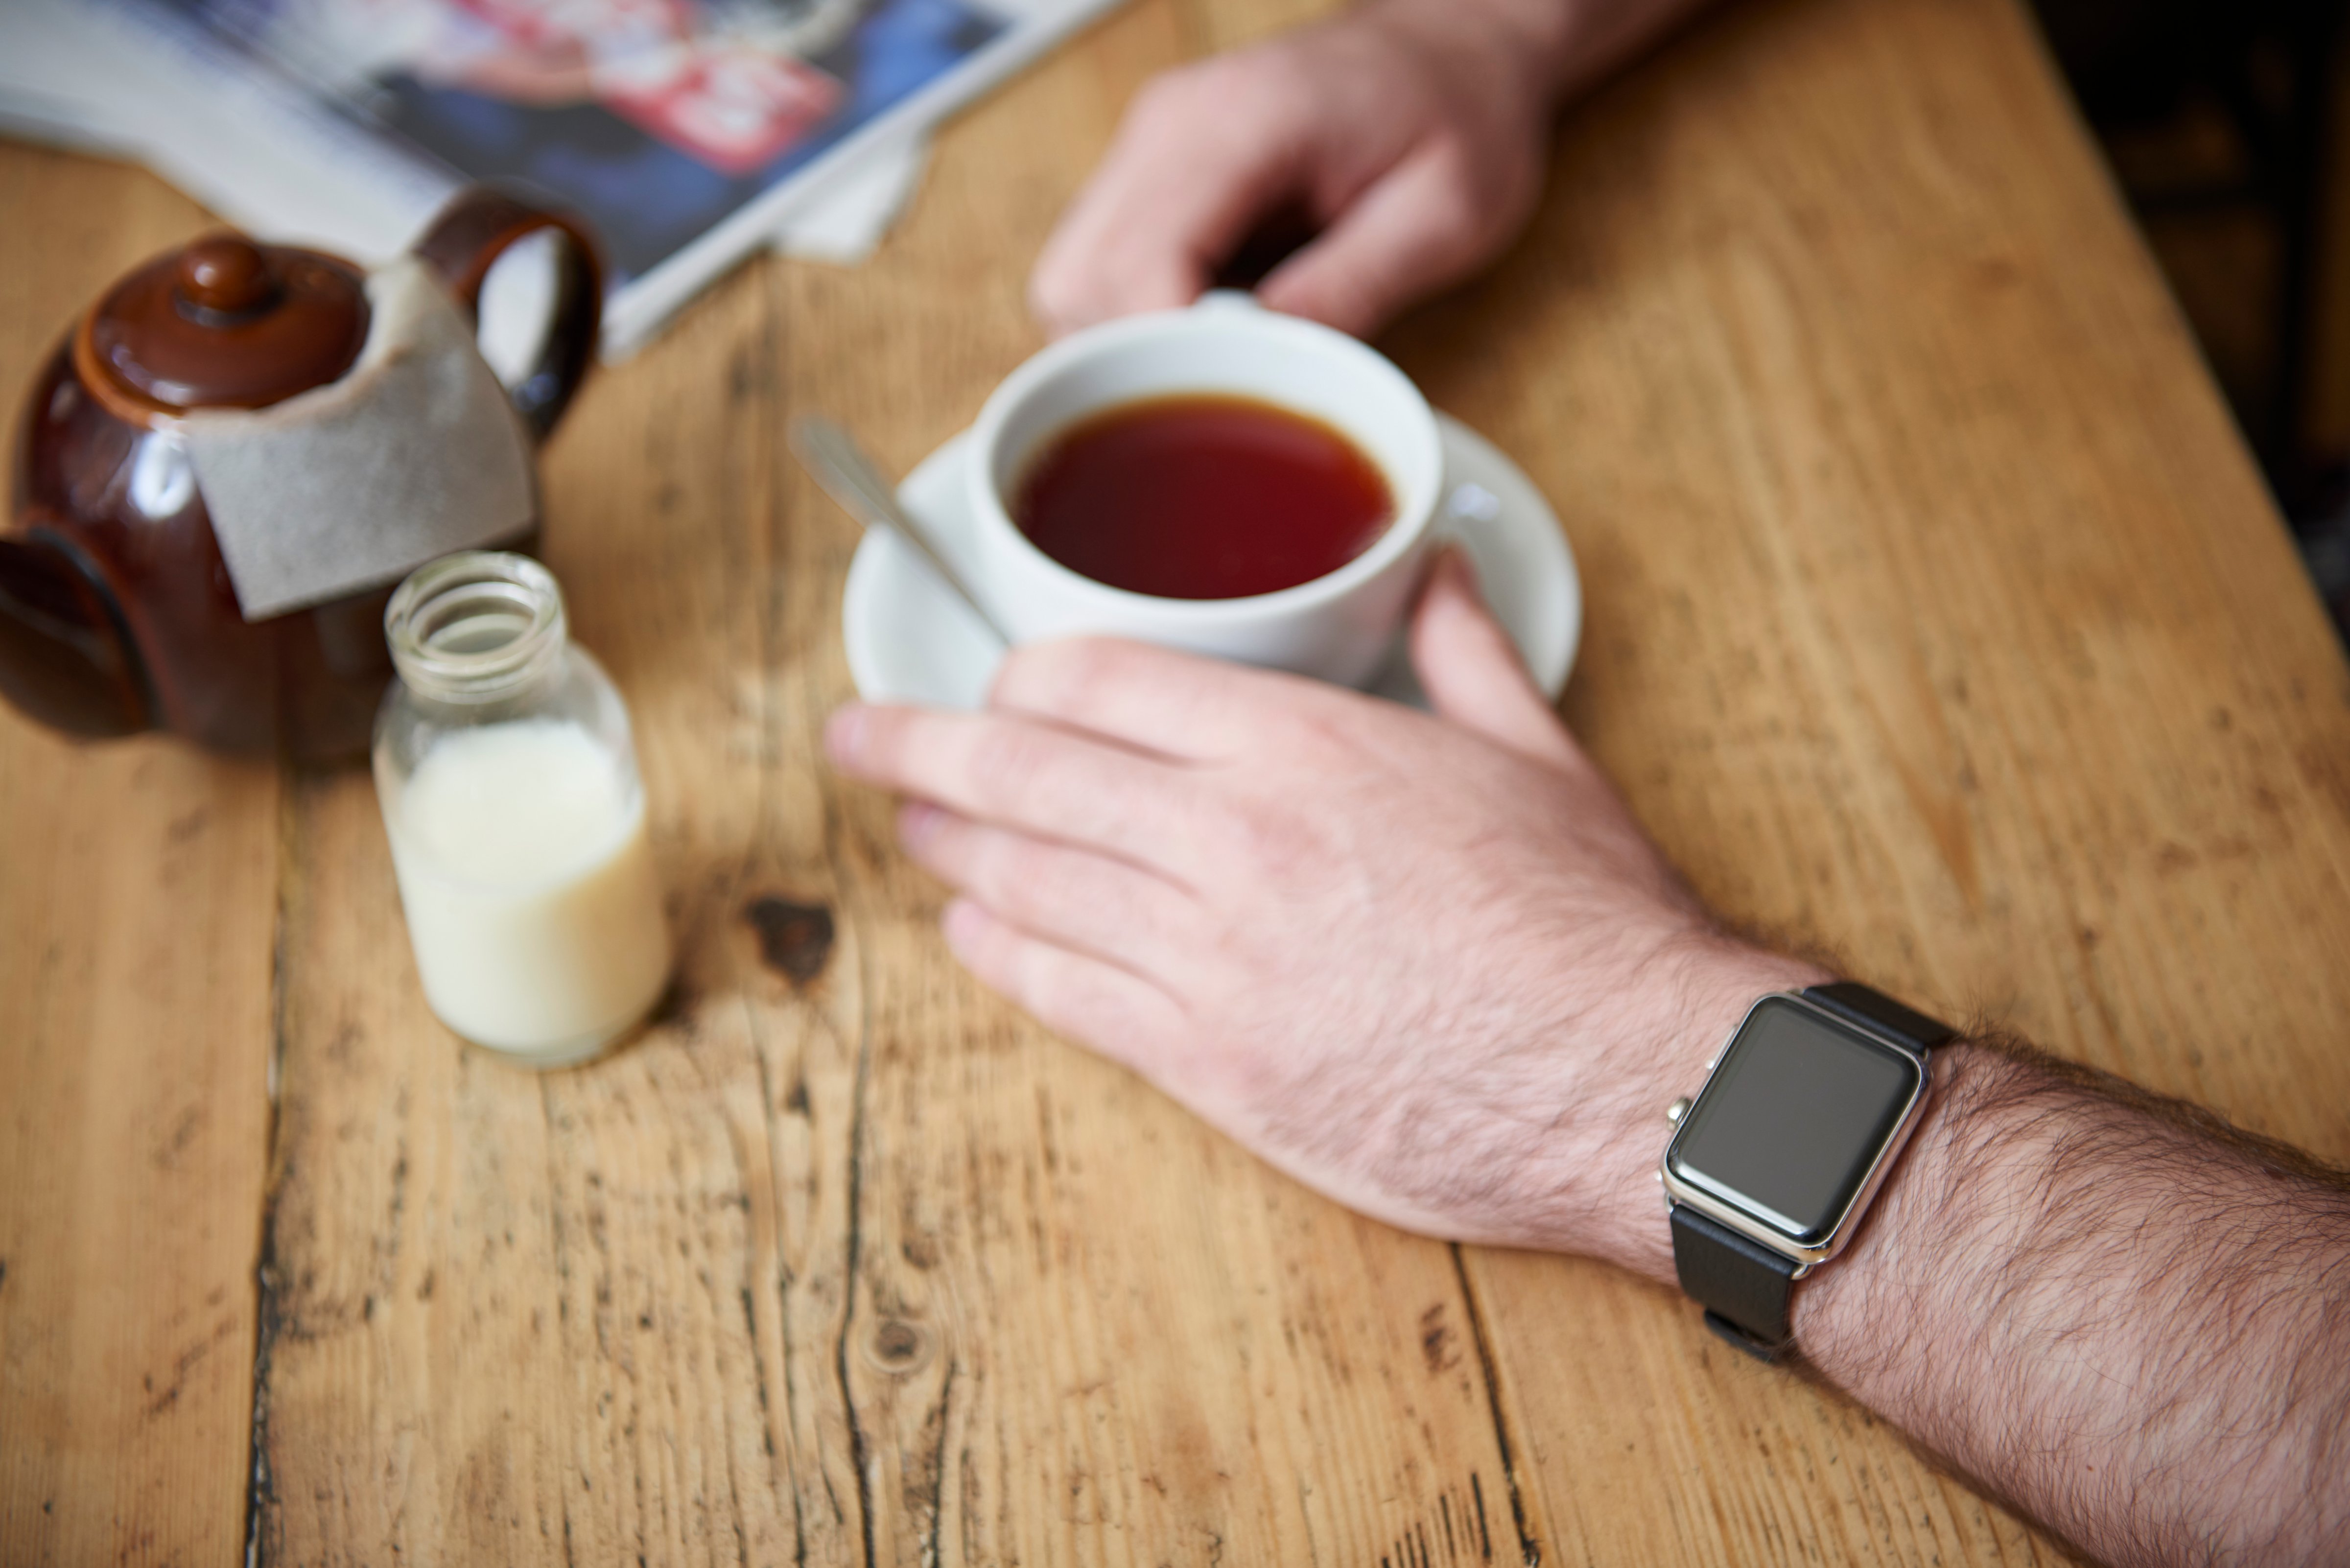 Detail of a man wearing an Apple Watch while sitting inside a cafe, taken on May 21, 2015. (Photo by Joseph Branston/Future Publishing via Getty Images) (Future Publishing—Future Publishing)